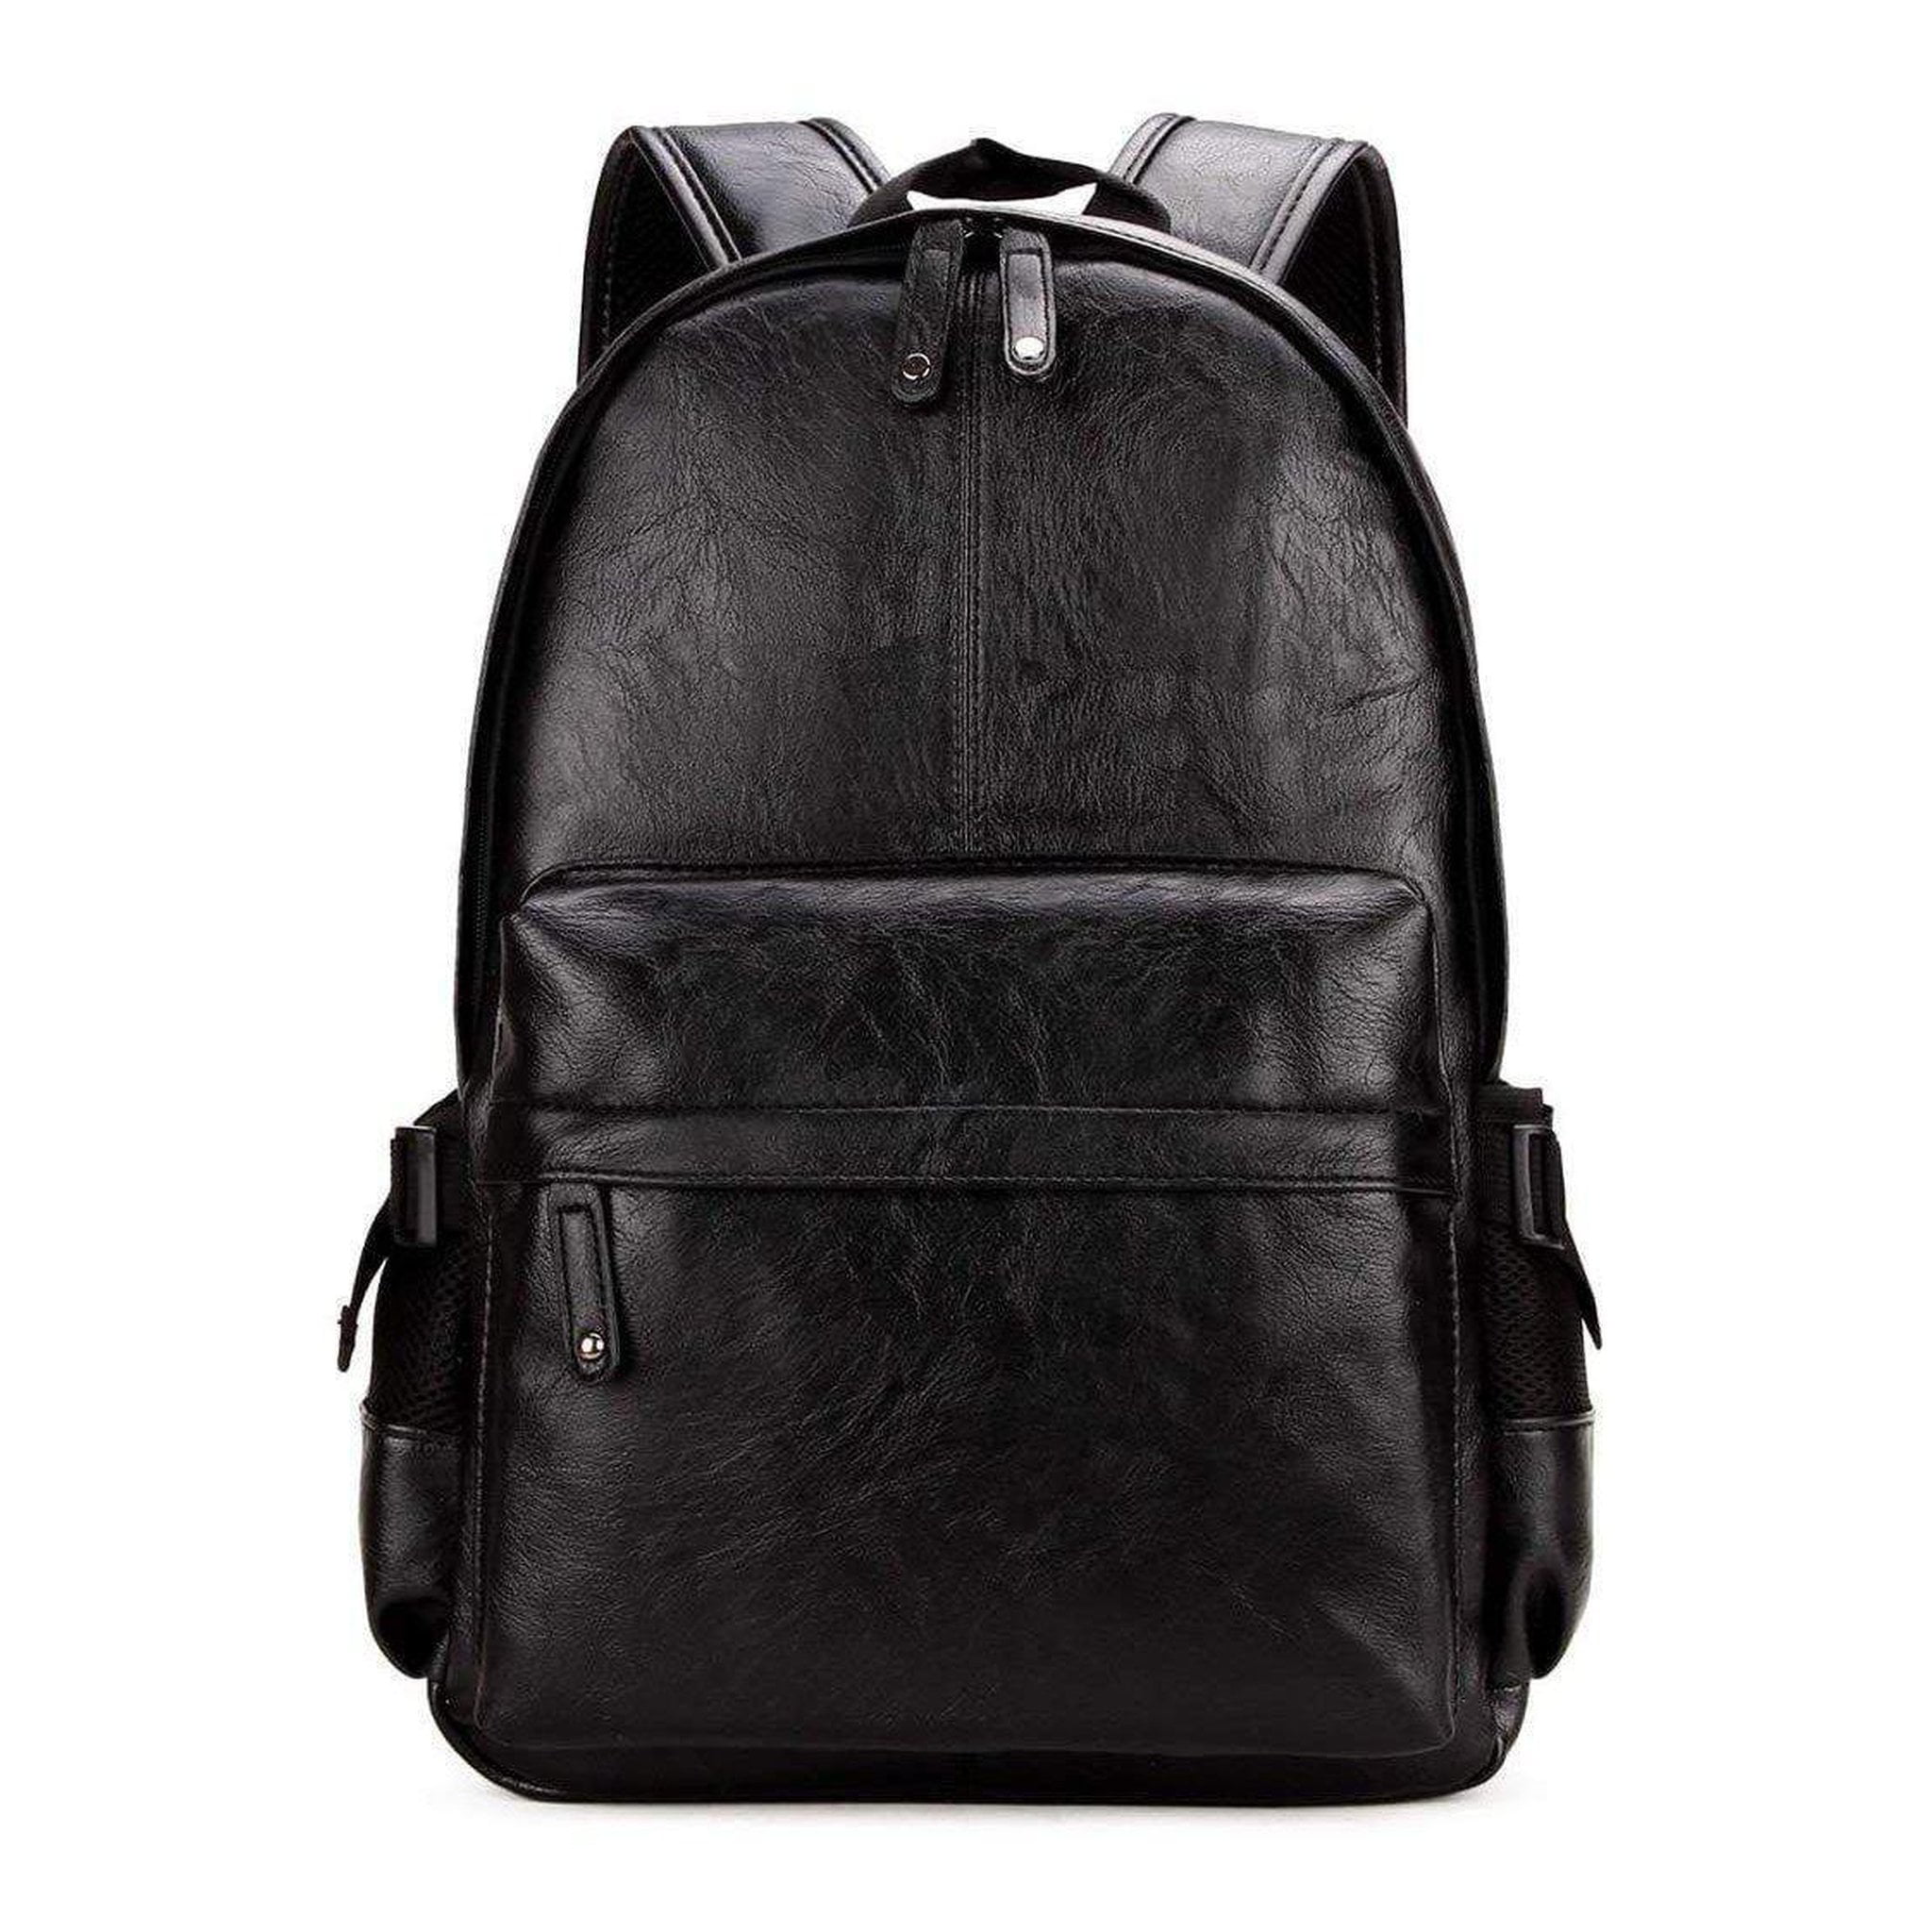 1 PCs Men Backpack External USB Charge Waterproof Backpack Fashion PU Leather Travel Bag Casual School Bag For Teenagers Backpacks Best Quality by Olwen Shop